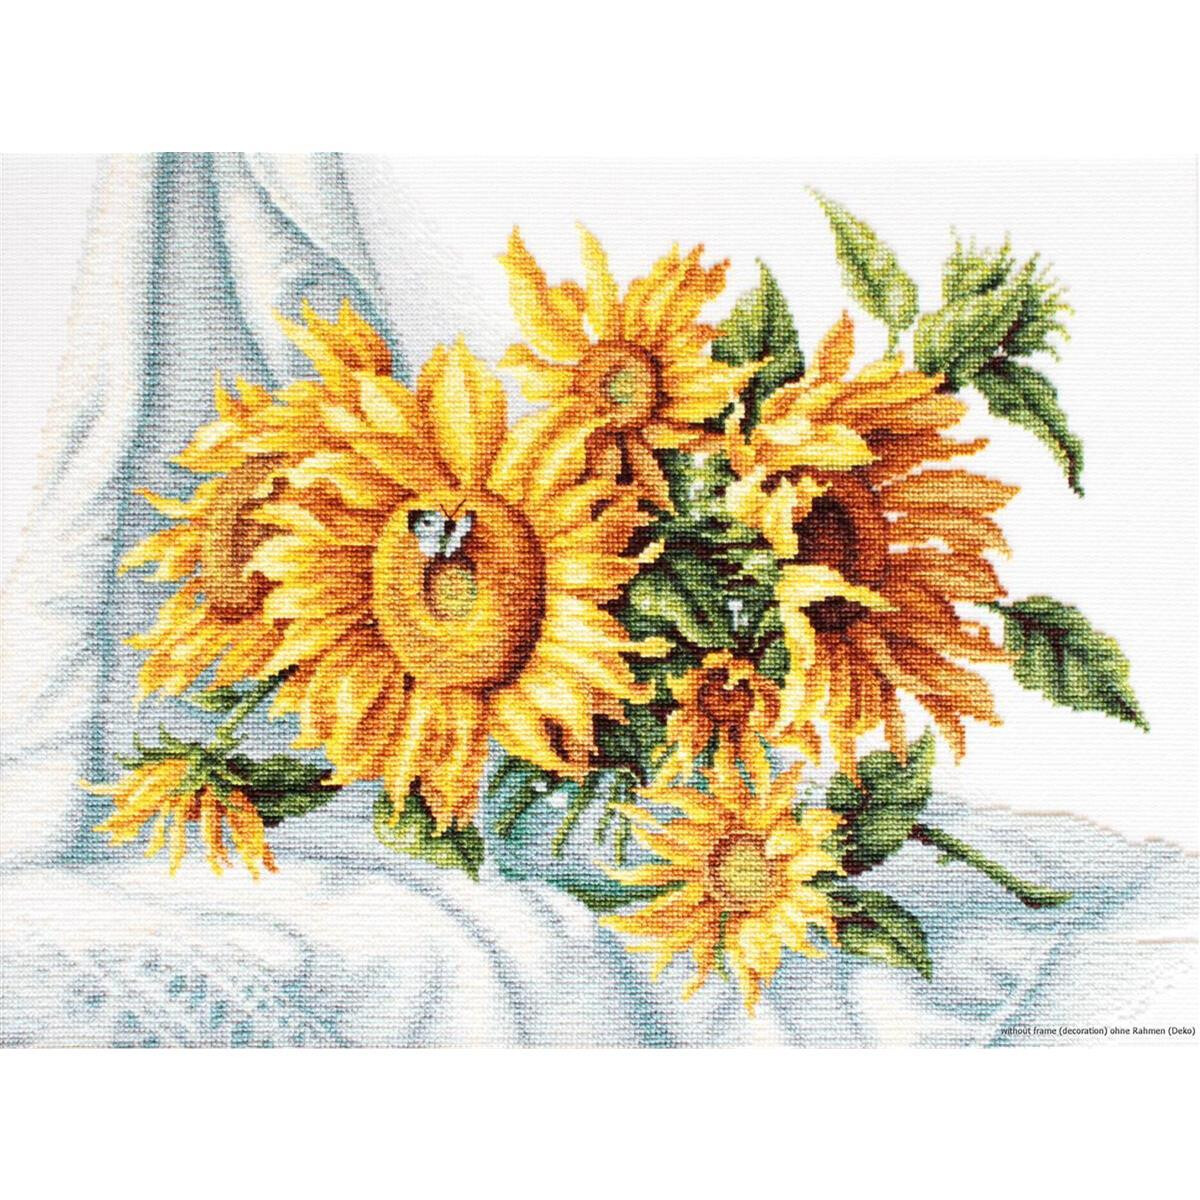 Luca-S counted Cross Stitch kit "Sunflowers",...